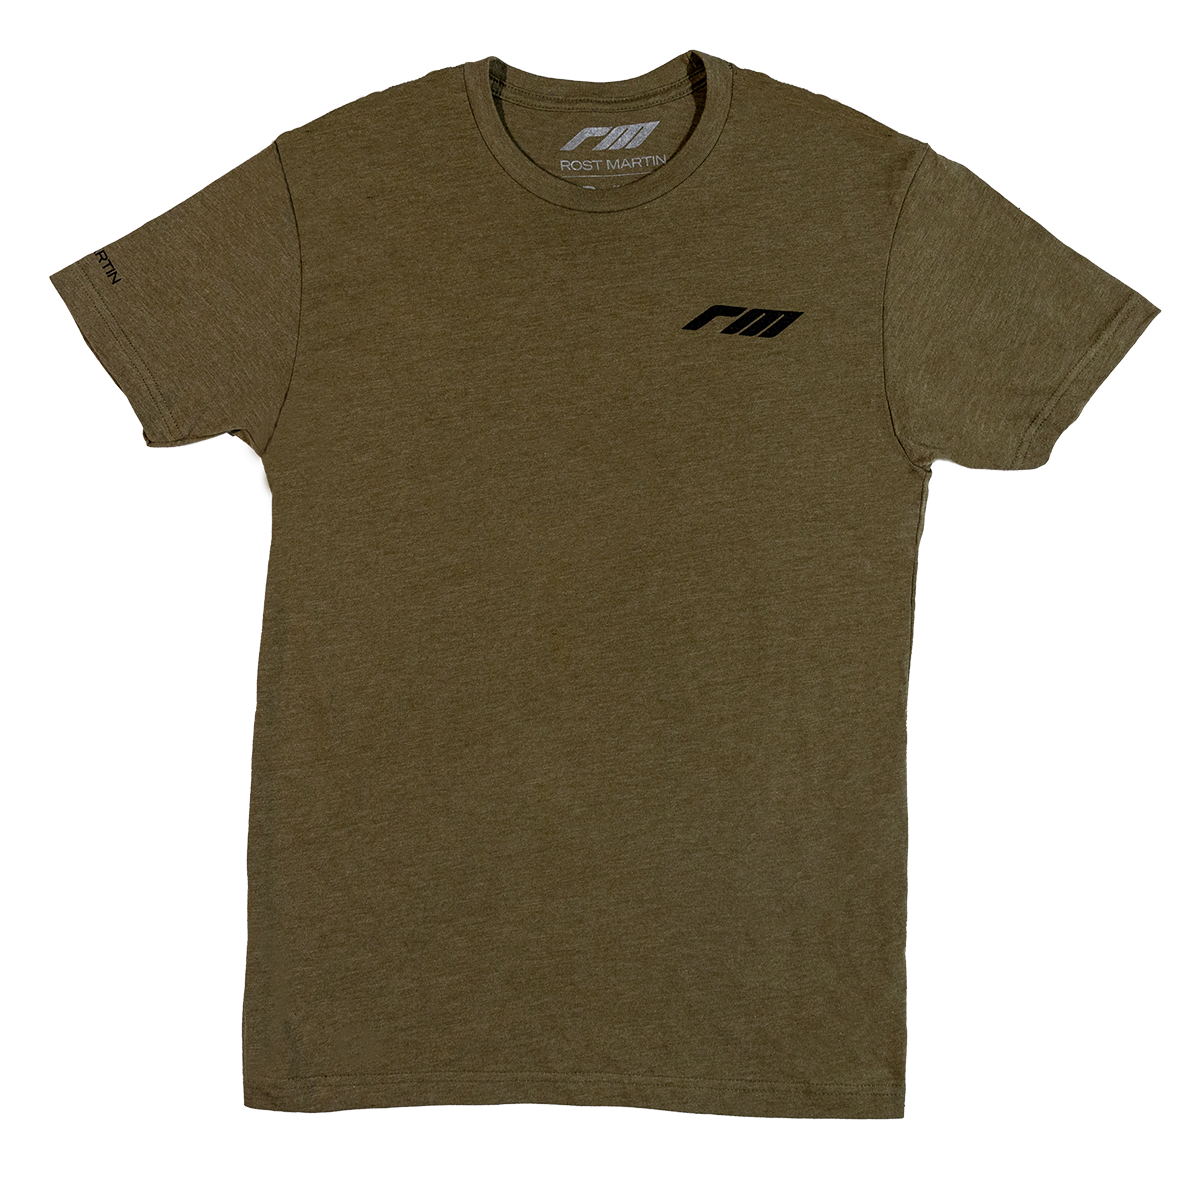 Product: Rost Martin Signature Tee – OD Green